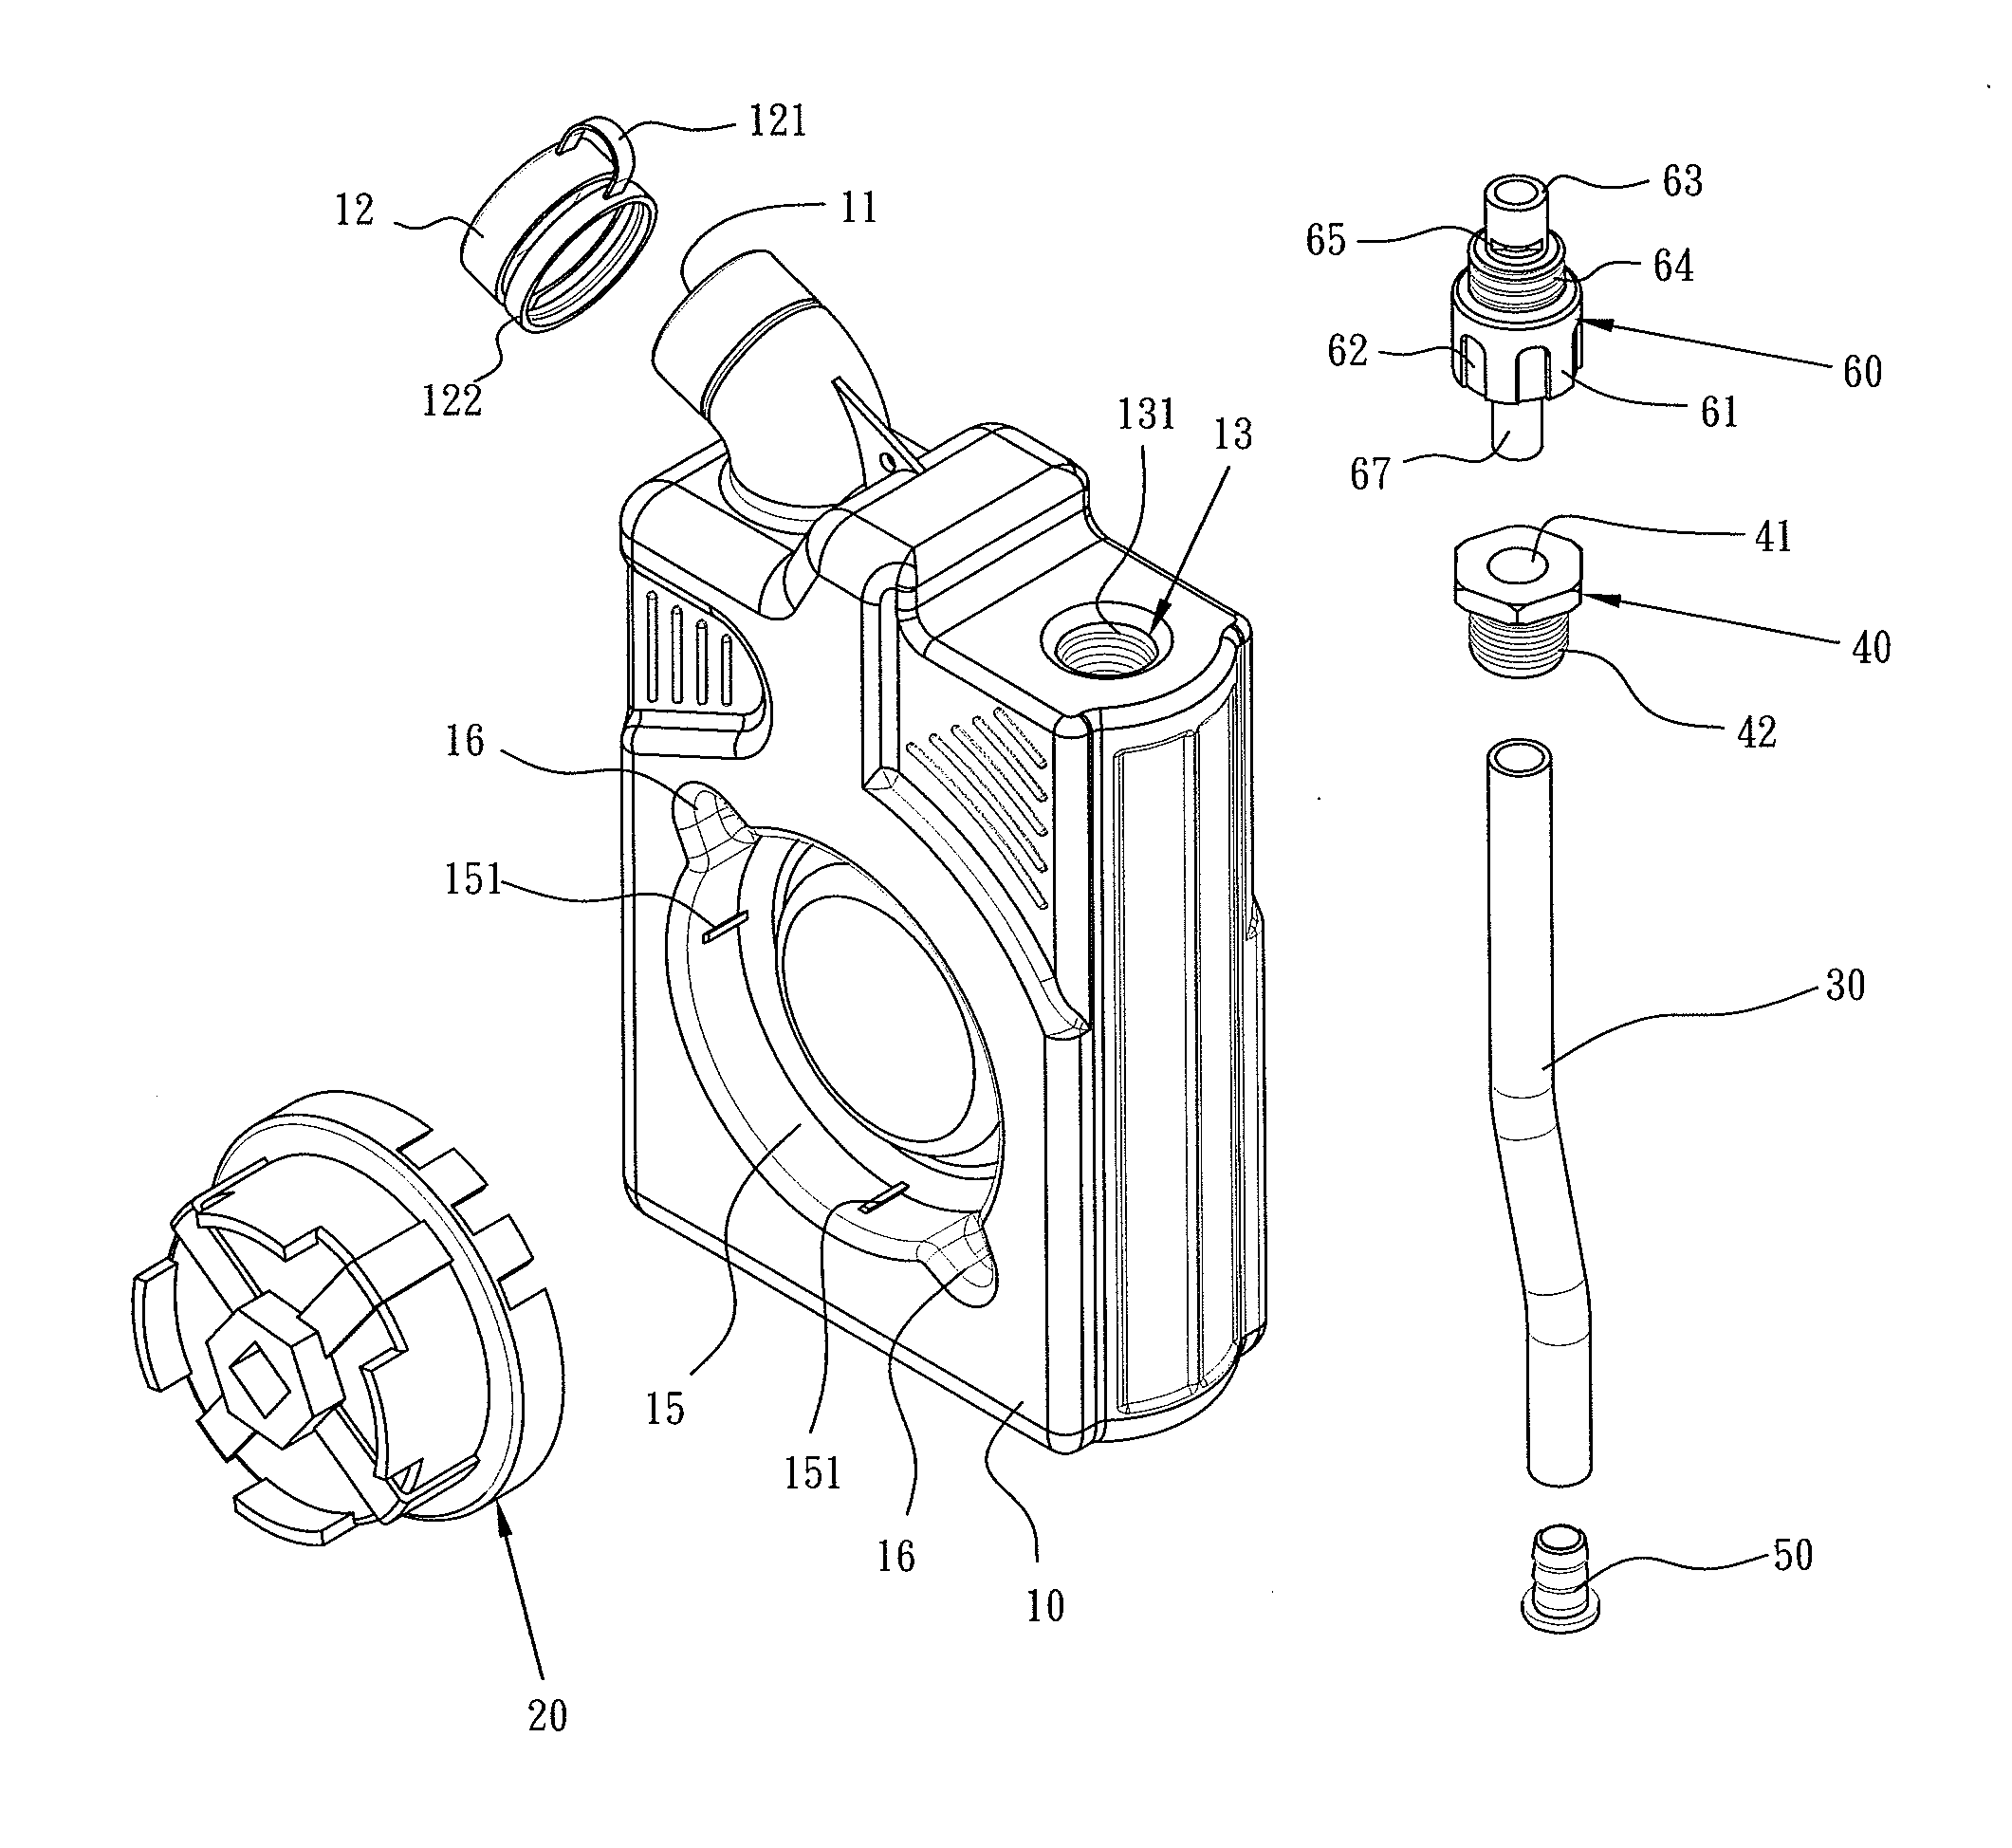 Dismounting device for environment-friendly oil filter